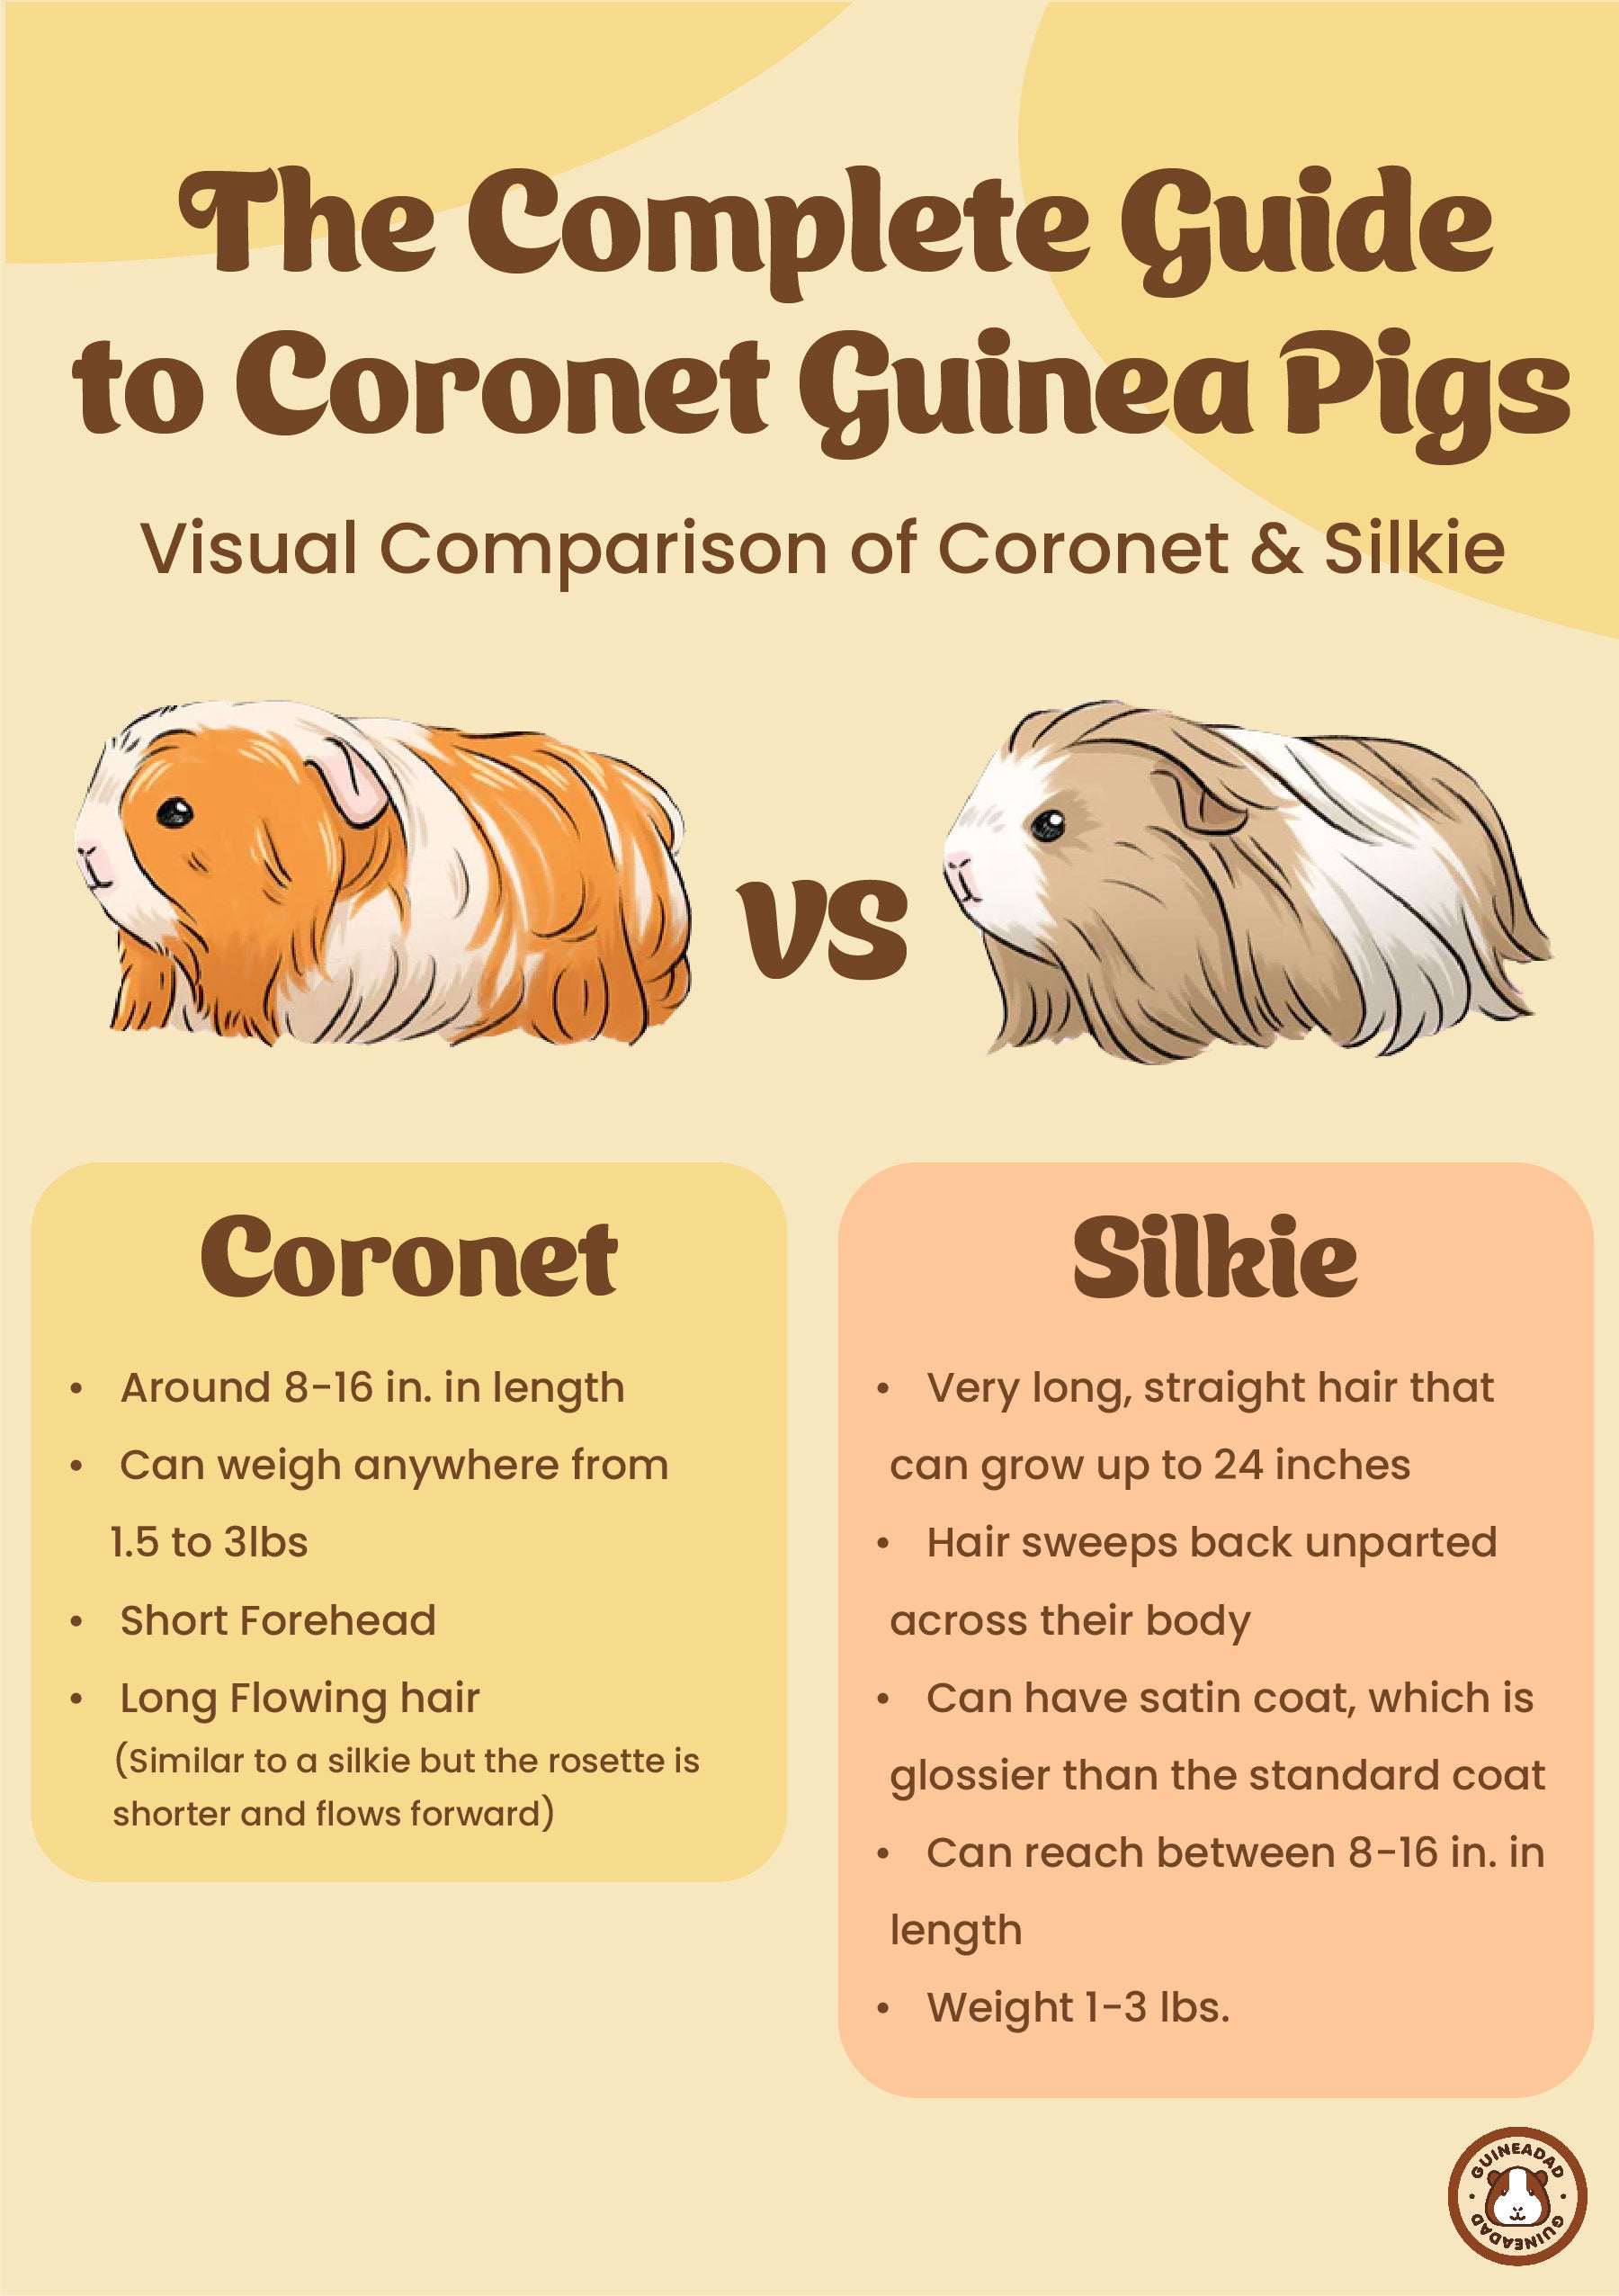 Infographic displaying the differences between the appearances of coronet guinea pigs and silkie guinea pigs